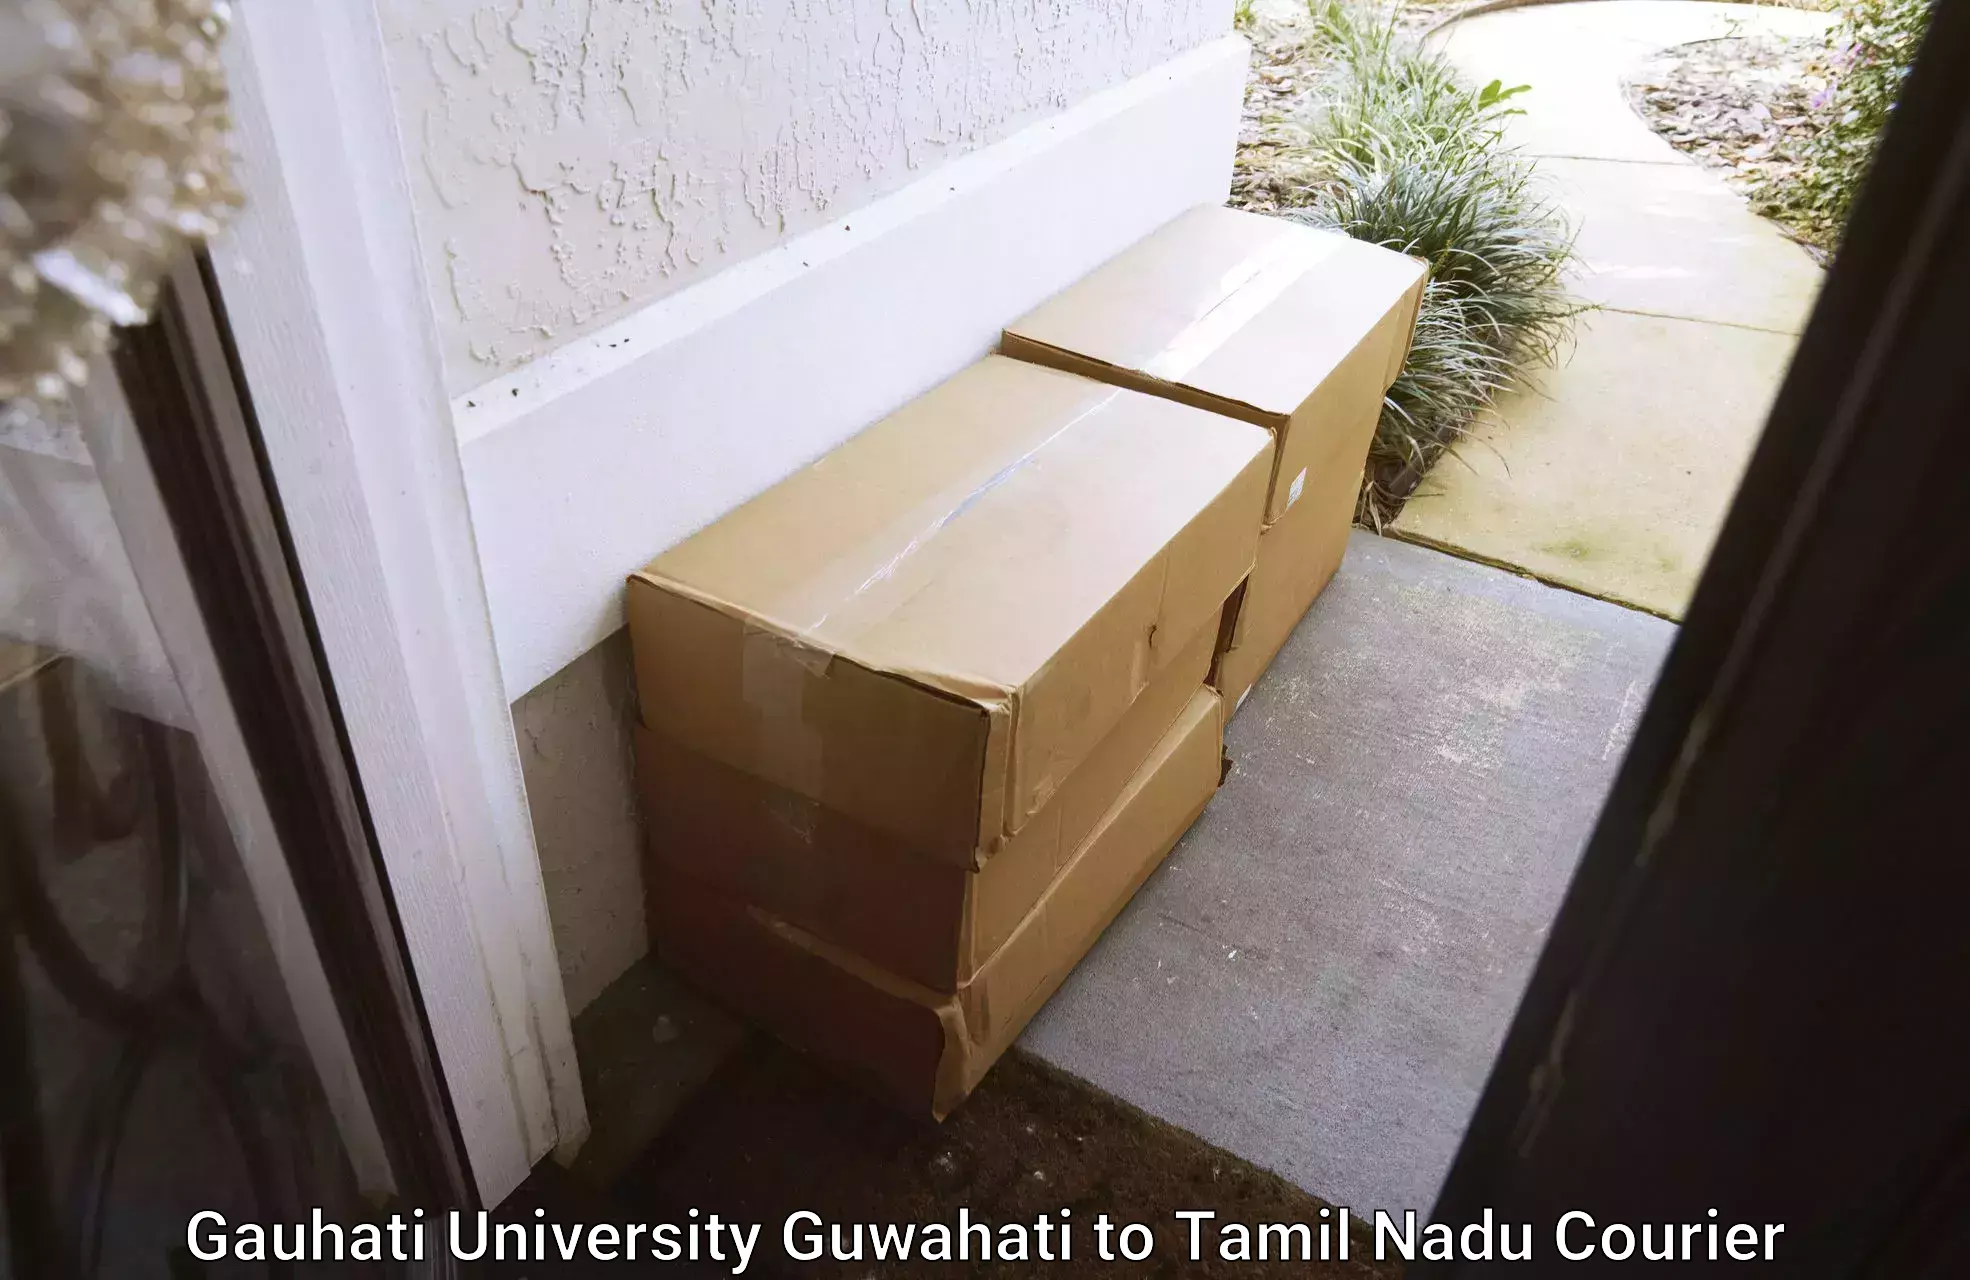 Parcel handling and care in Gauhati University Guwahati to Meenakshi Academy of Higher Education and Research Chennai